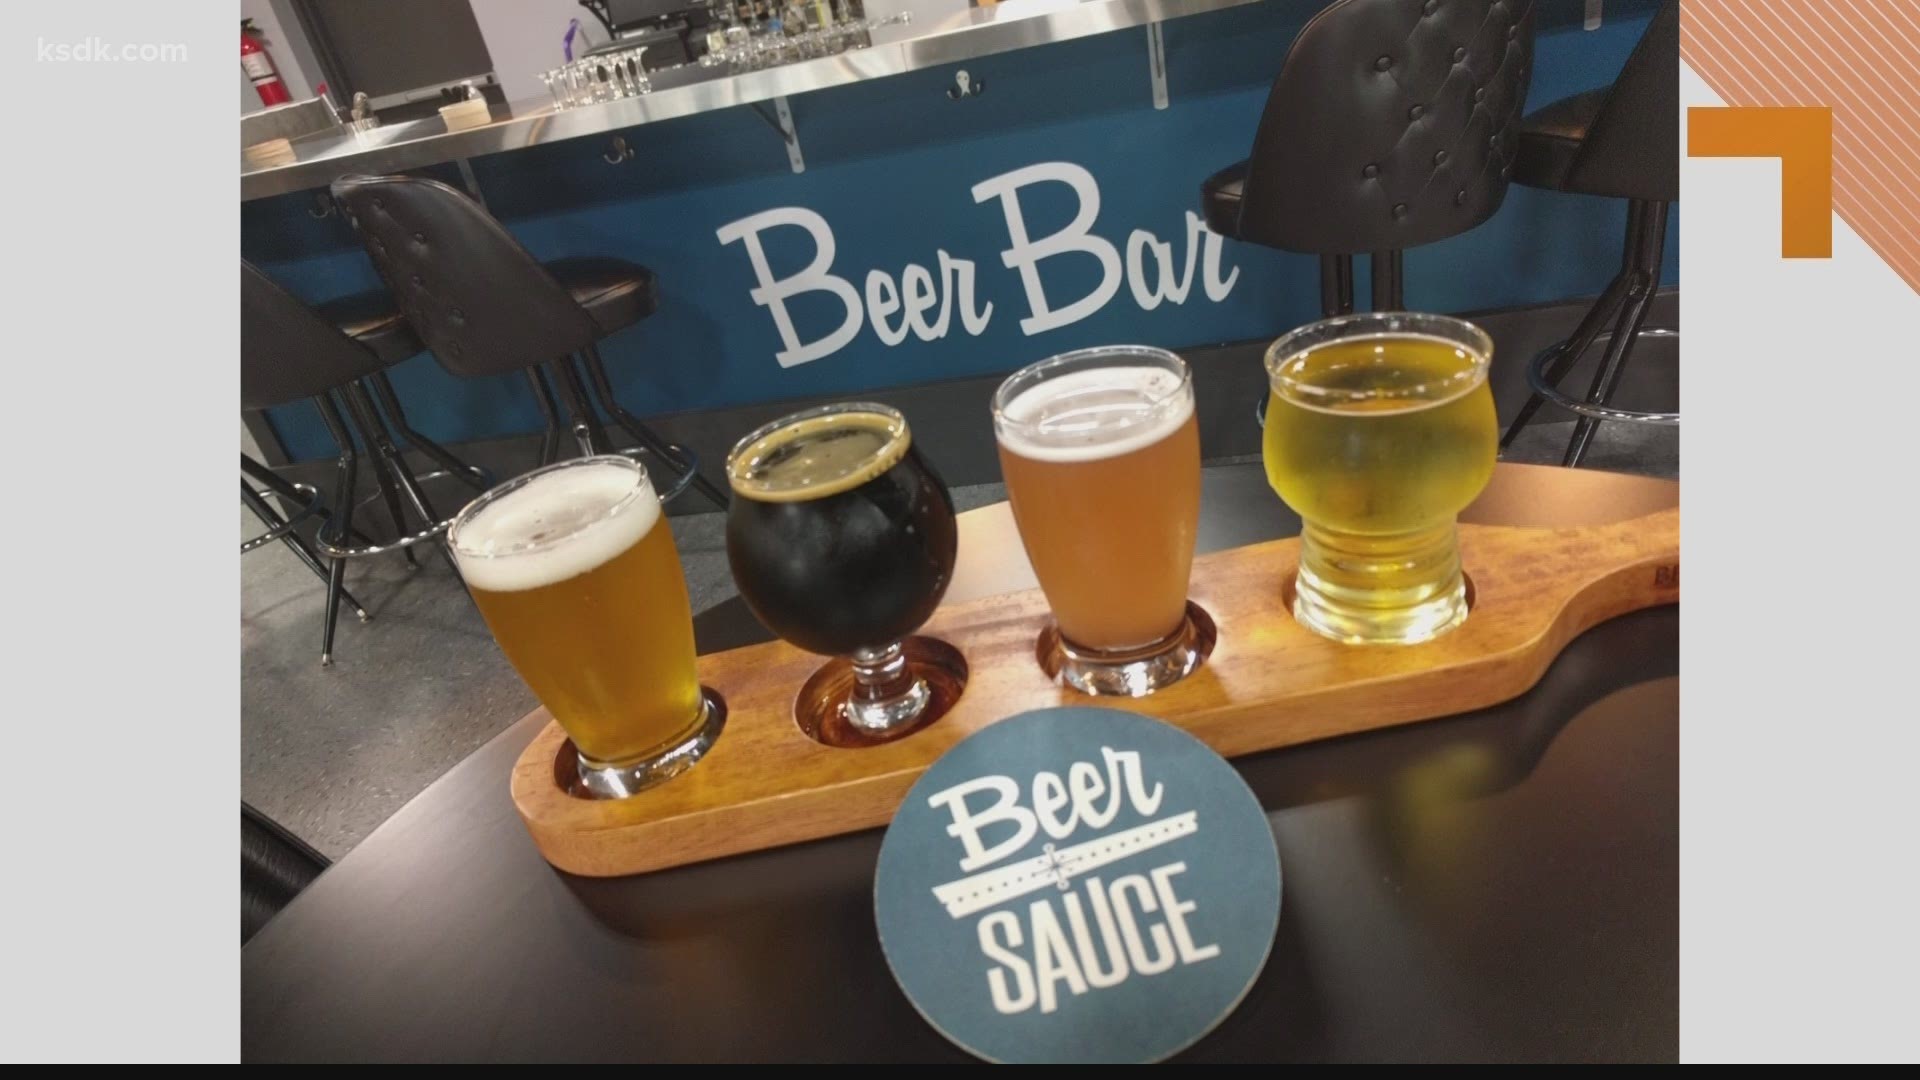 Locations are currently in St. Peters and Sunset Hills. The Ballwin location is set to open Friday, September 11. For more information, visit beersauceshop.com.